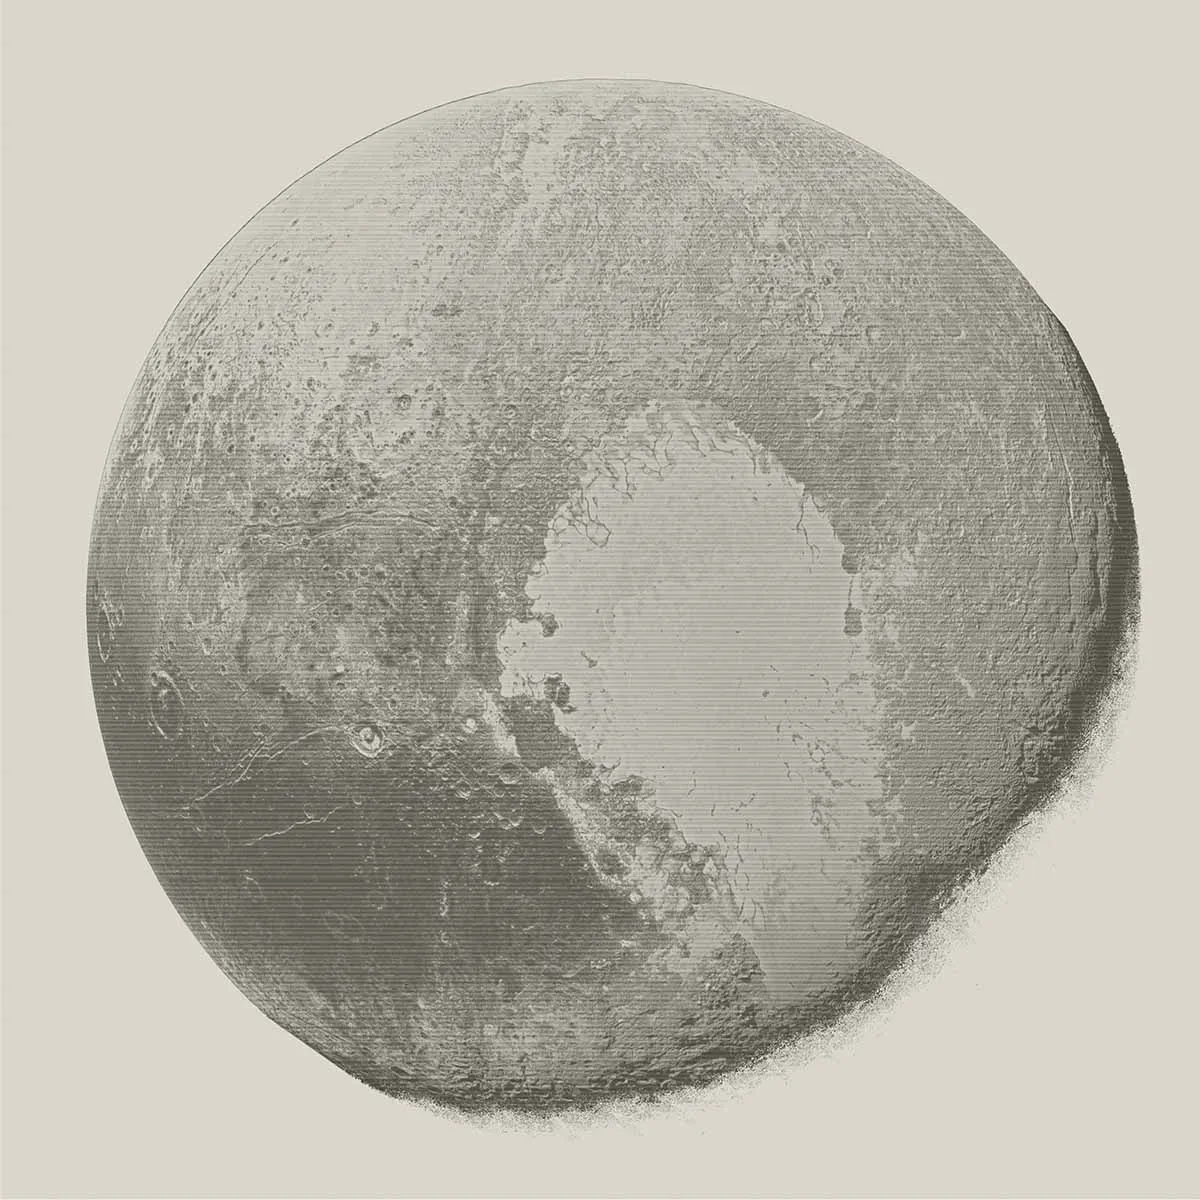 Cassinified Pluto, by Sergio Díaz Ruiz Category: Annie Maunder Prize for Image Innovation Monochrome image of Pluto generated using NASA data